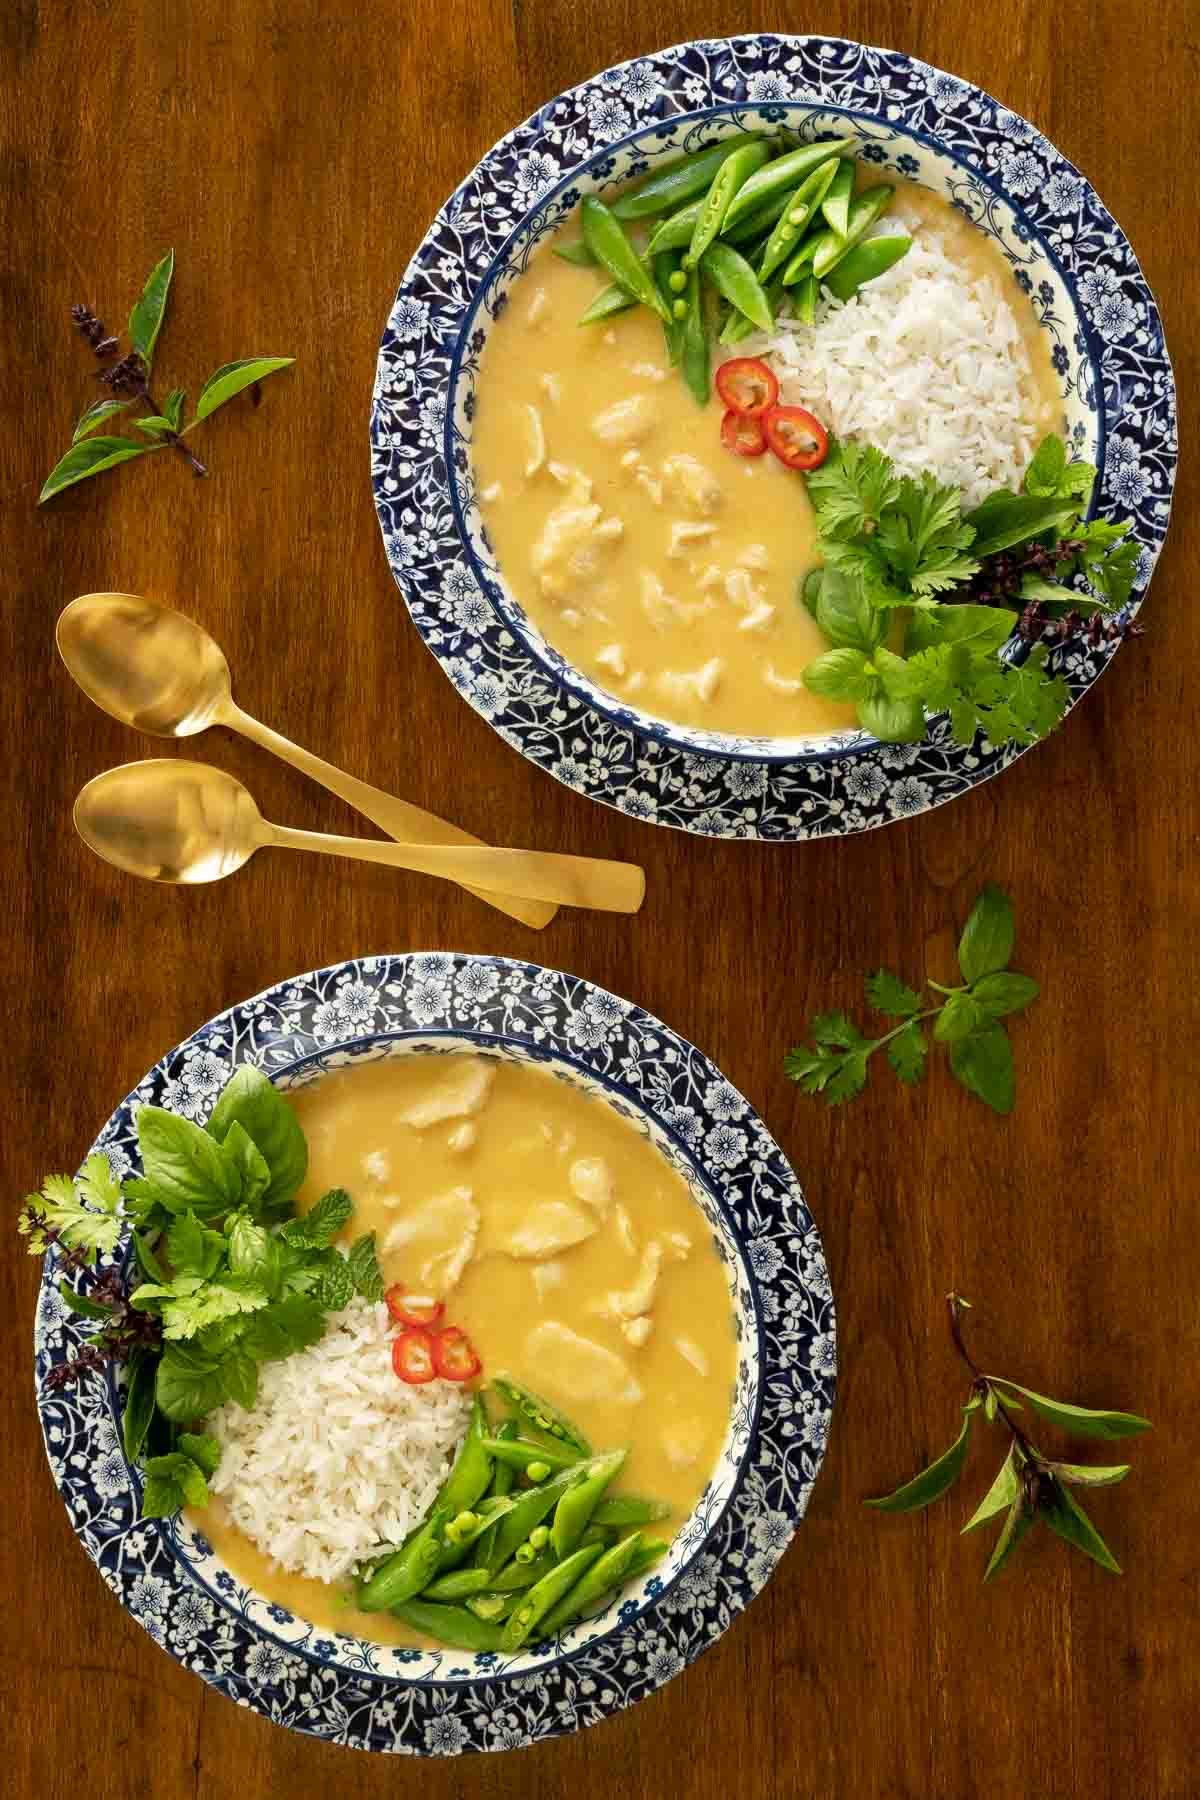 Vertical overhead photo of two bowls of Thai Coconut Chicken Soup (Tom Kha Gai) on a wood table garnished with basmati rice, fresh vegetables, peppers and herbs.